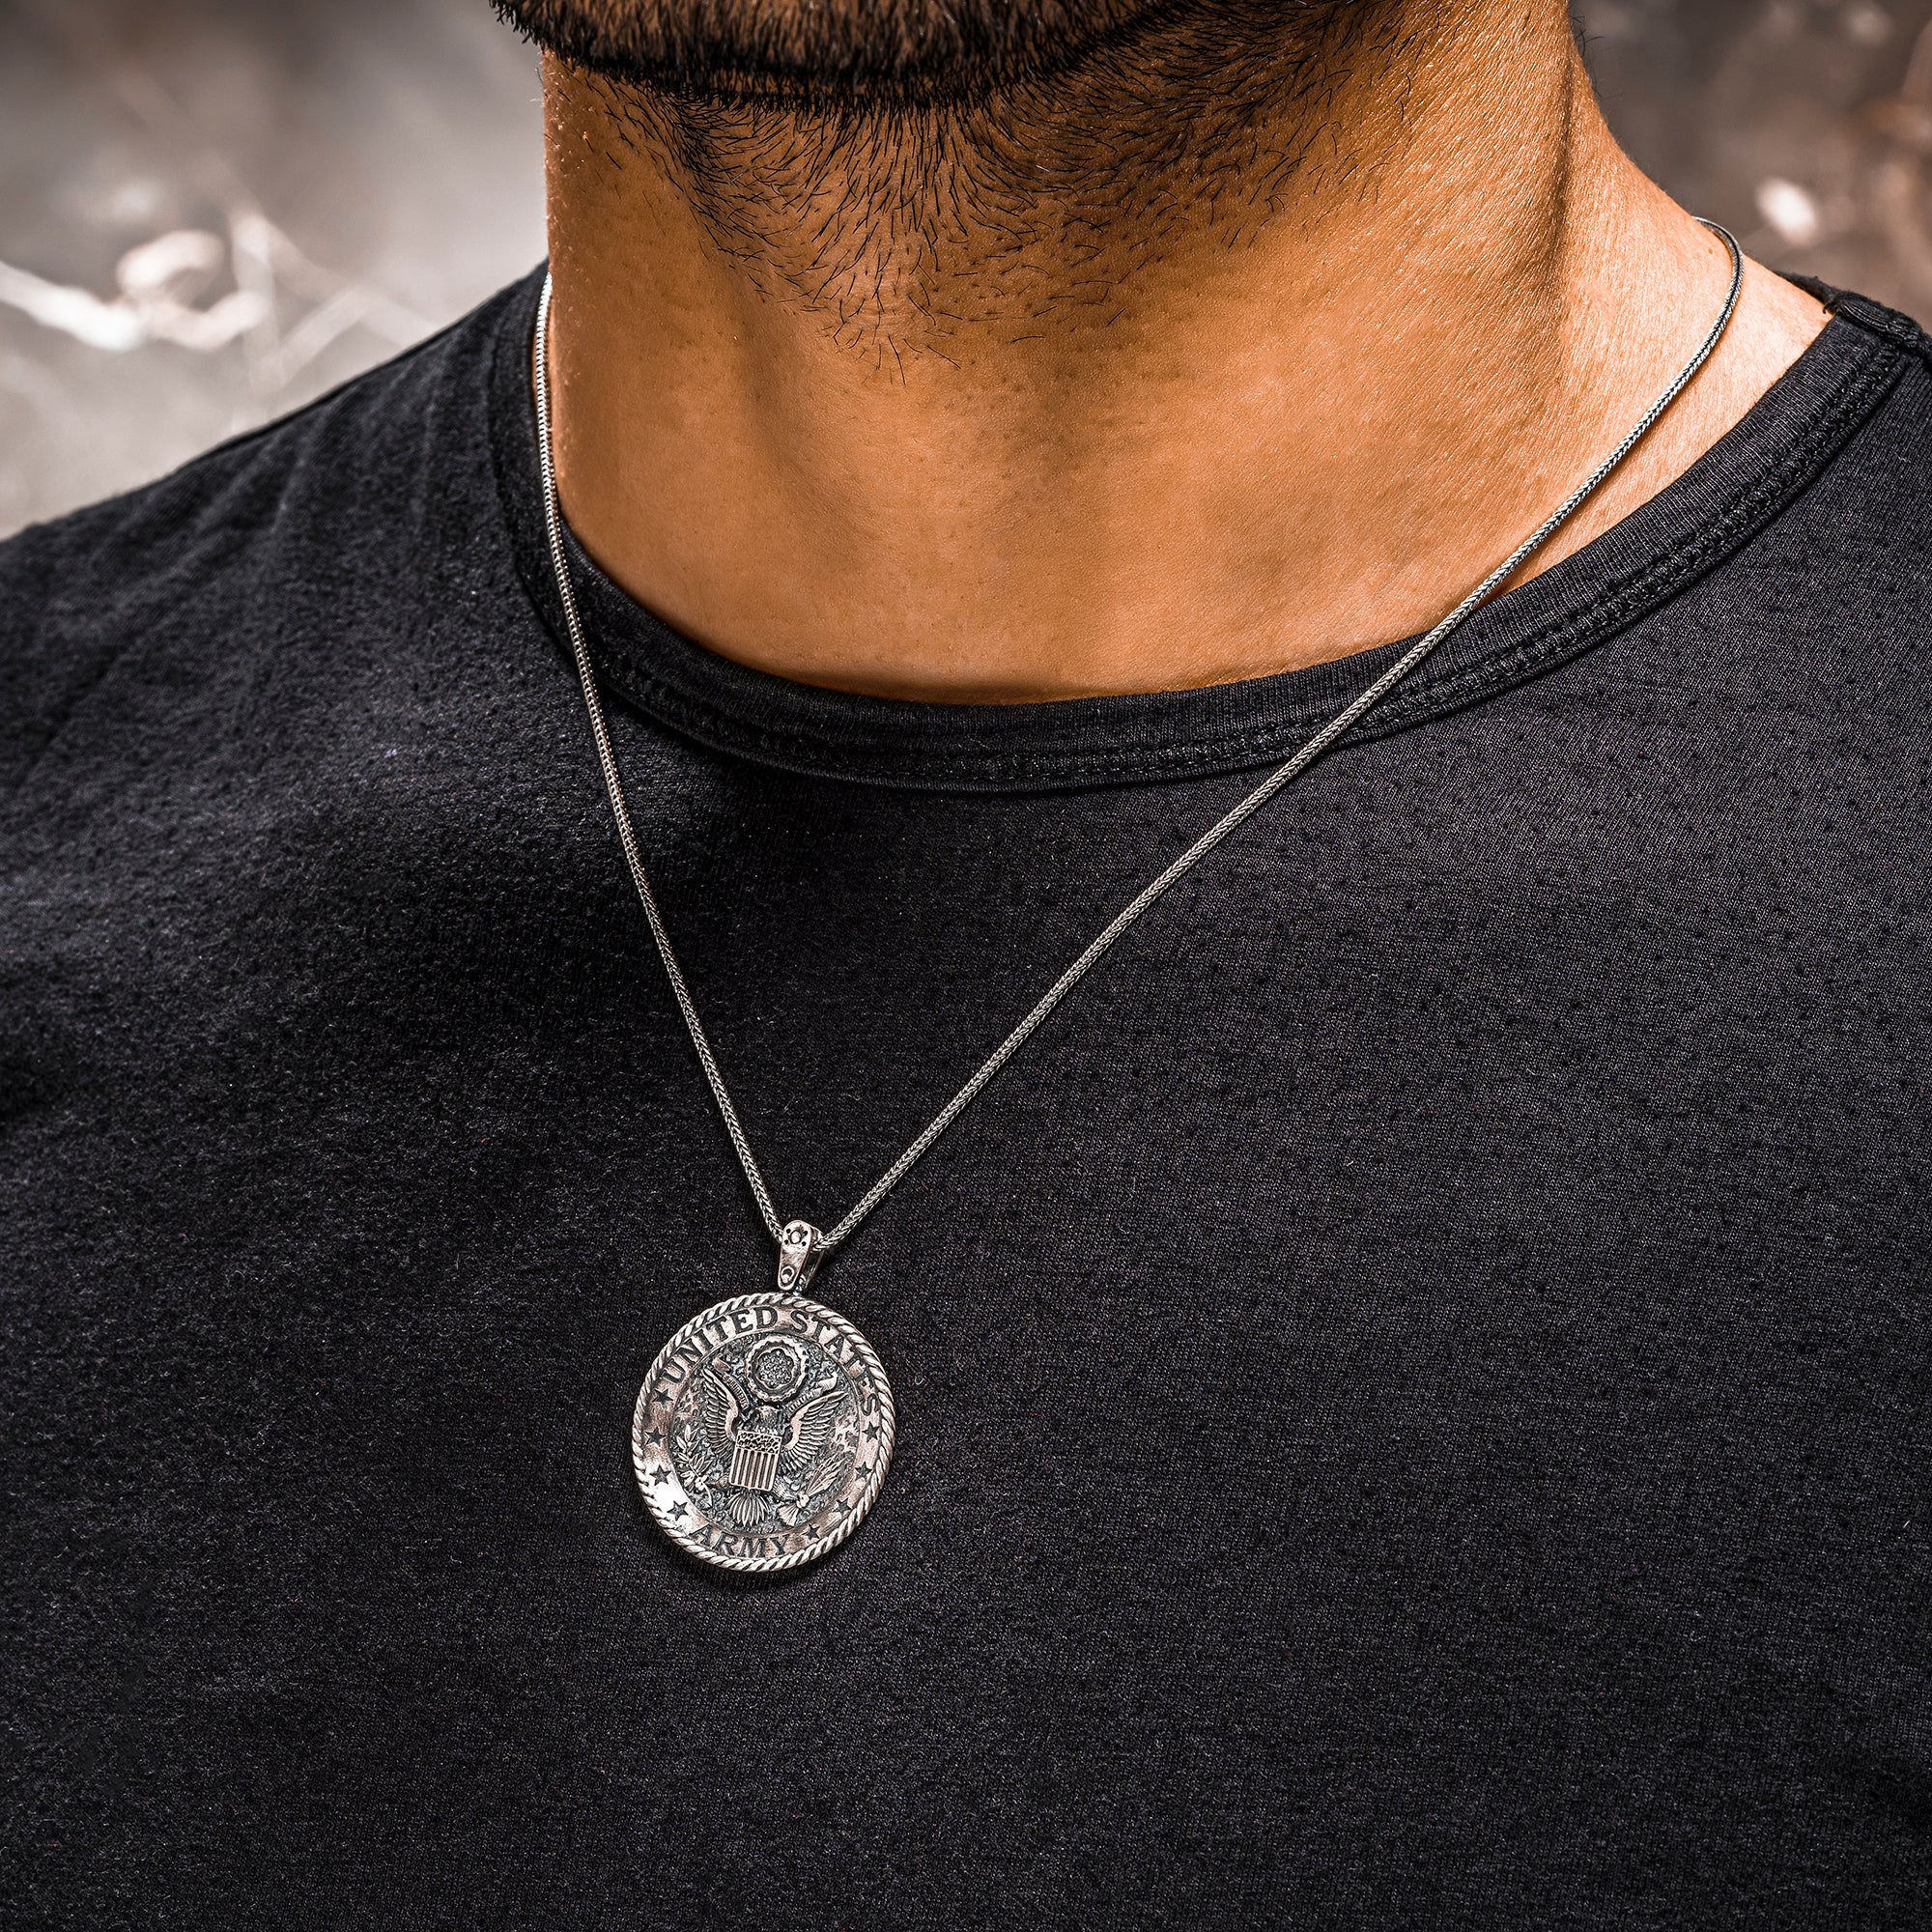 Us Army Men Necklace,925 Army necklace,United States Army Necklace ,Men Sİlver Necklace,Sterling Silver men Necklace